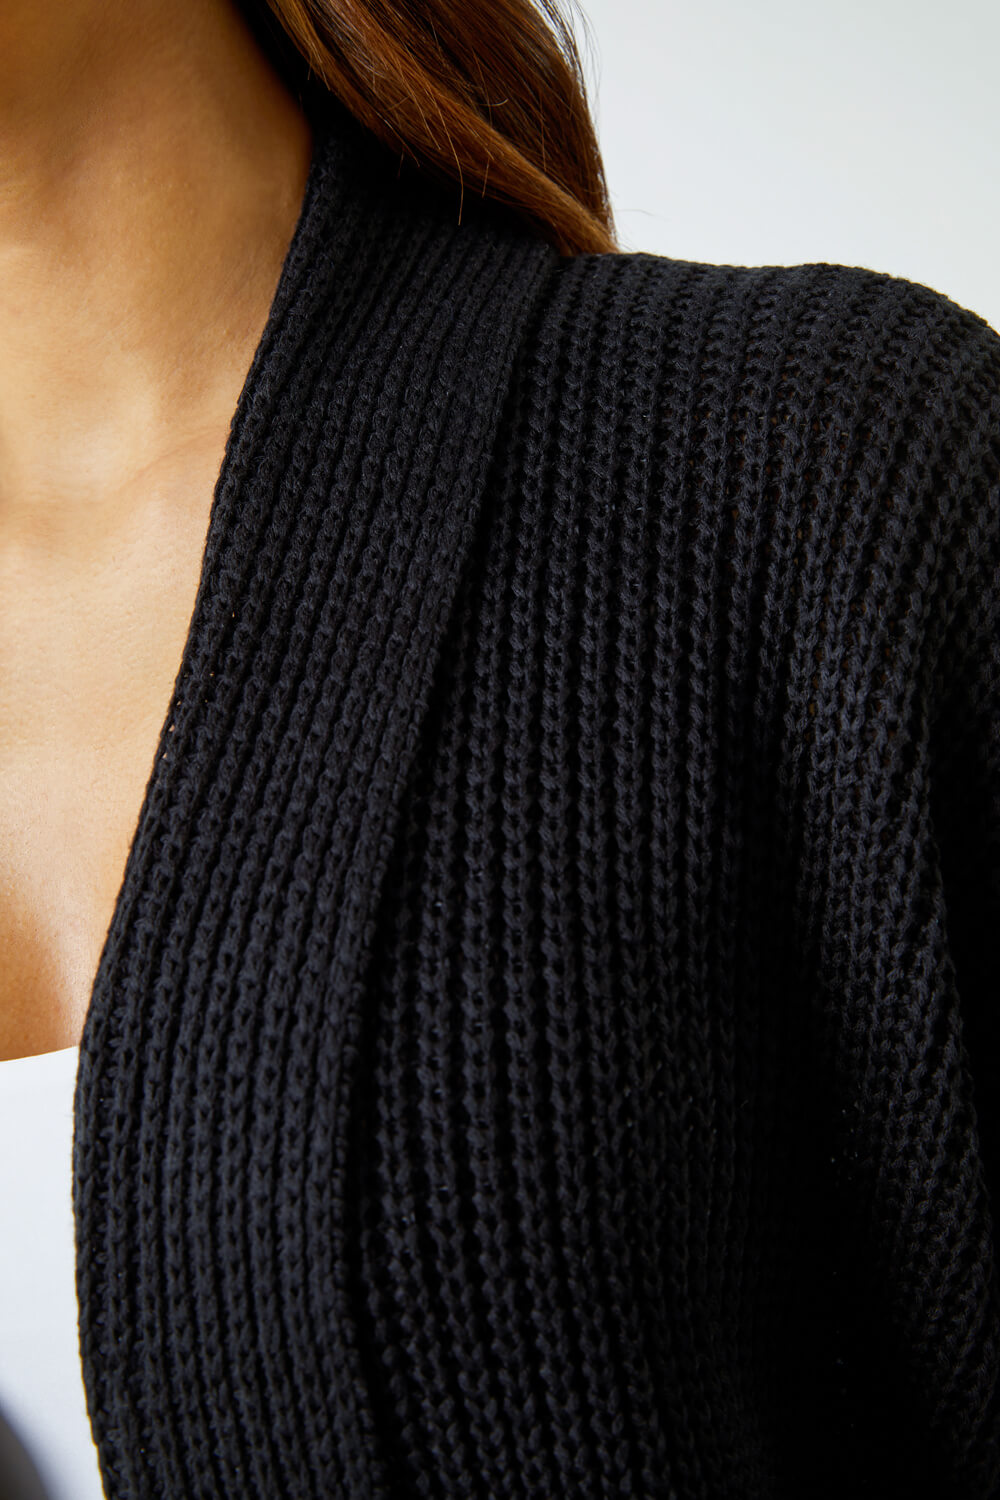 Black Relaxed Knitted Shrug, Image 5 of 5